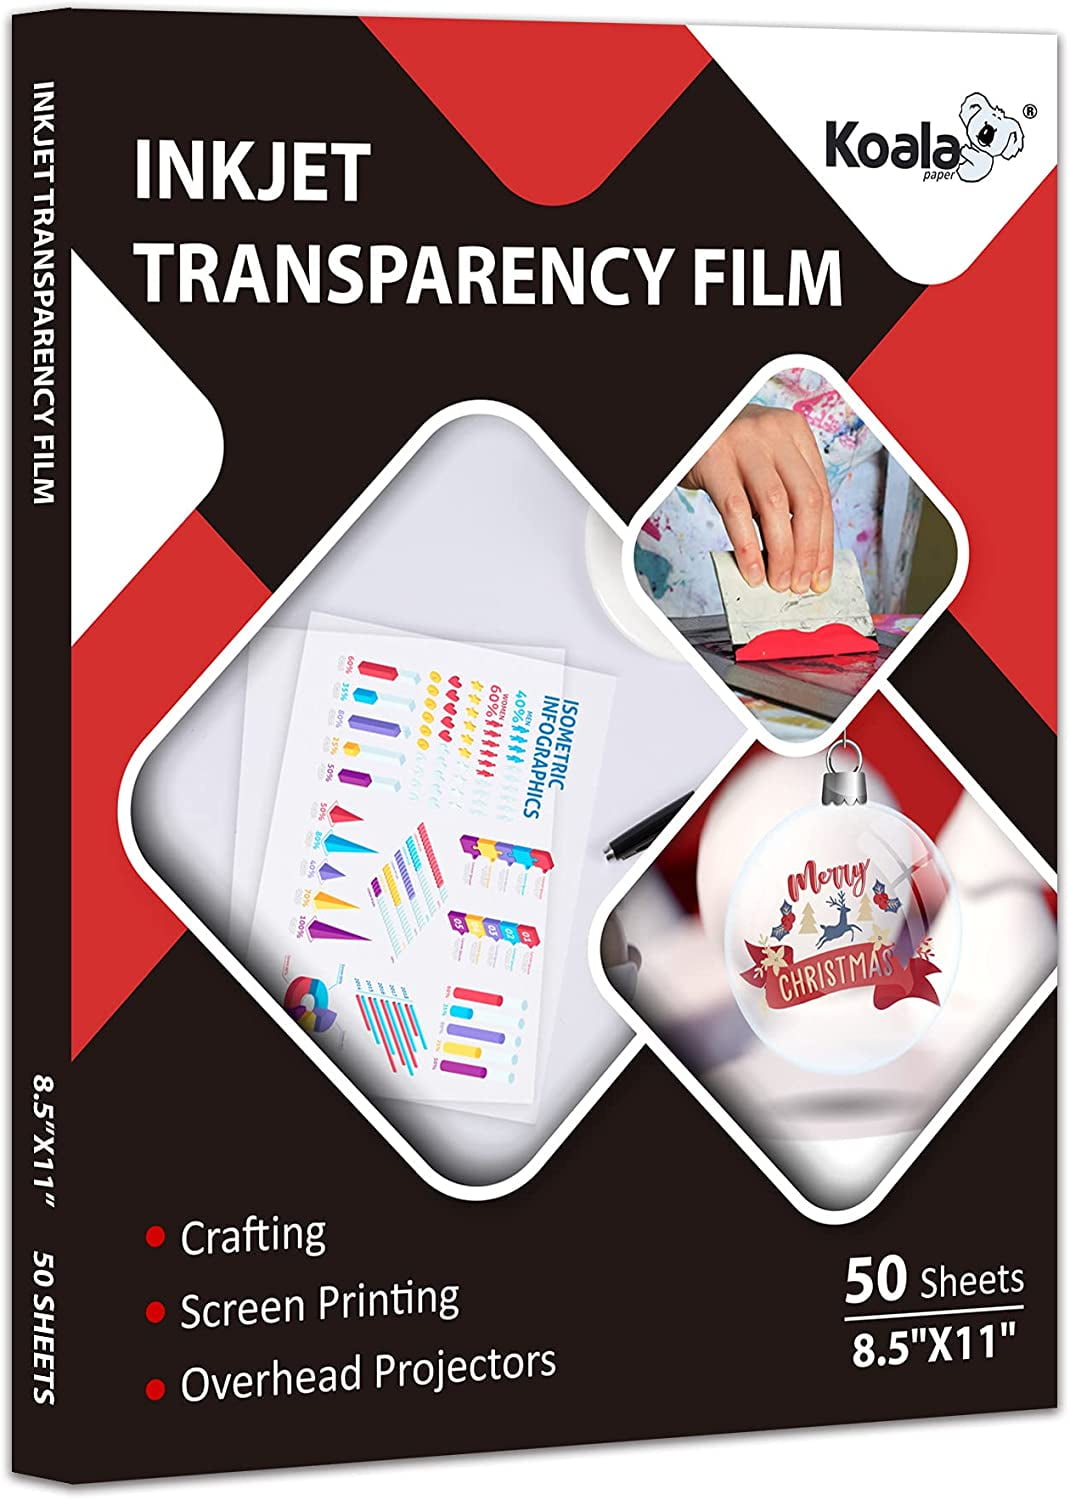 8.5x11 Inches 50 Sheets Inkjet Transparency Paper,100% Clear Inkjet Transparency Film for Inkjet Printers,Overhead Projector Transparencies and Screen Prints 